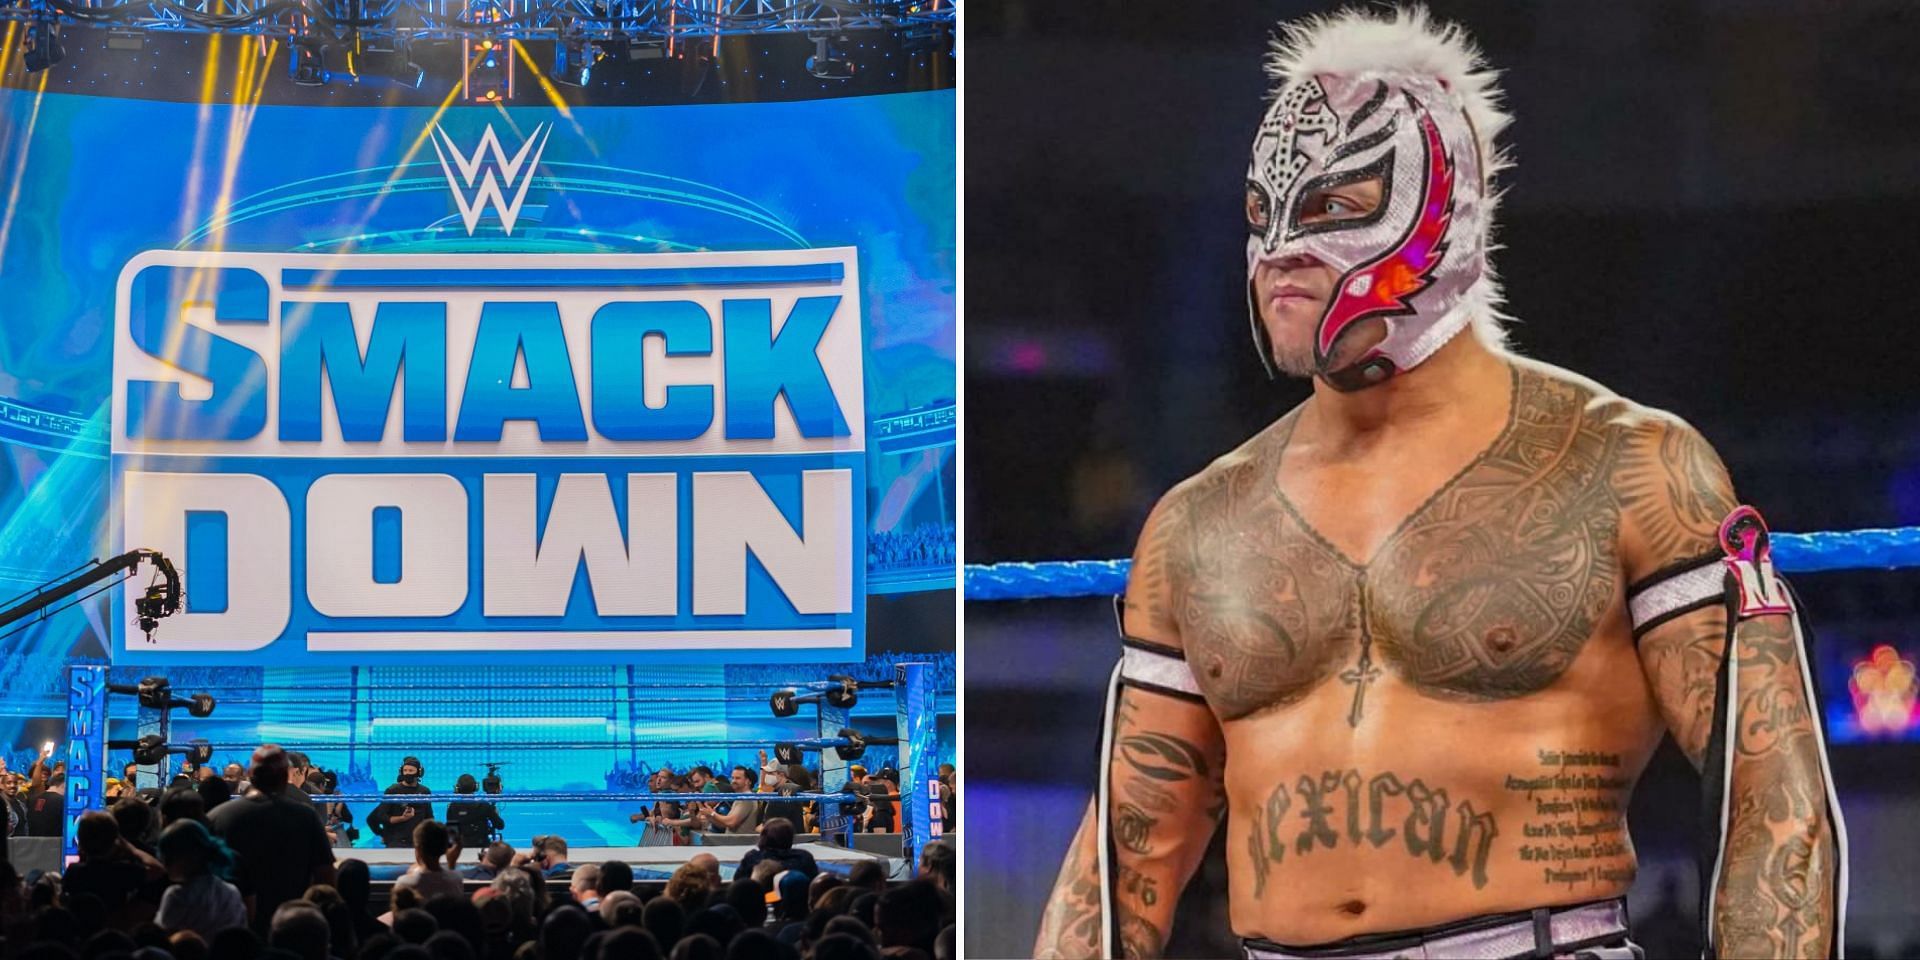 Rey Mysterio was involved in a backsage segment with LWO